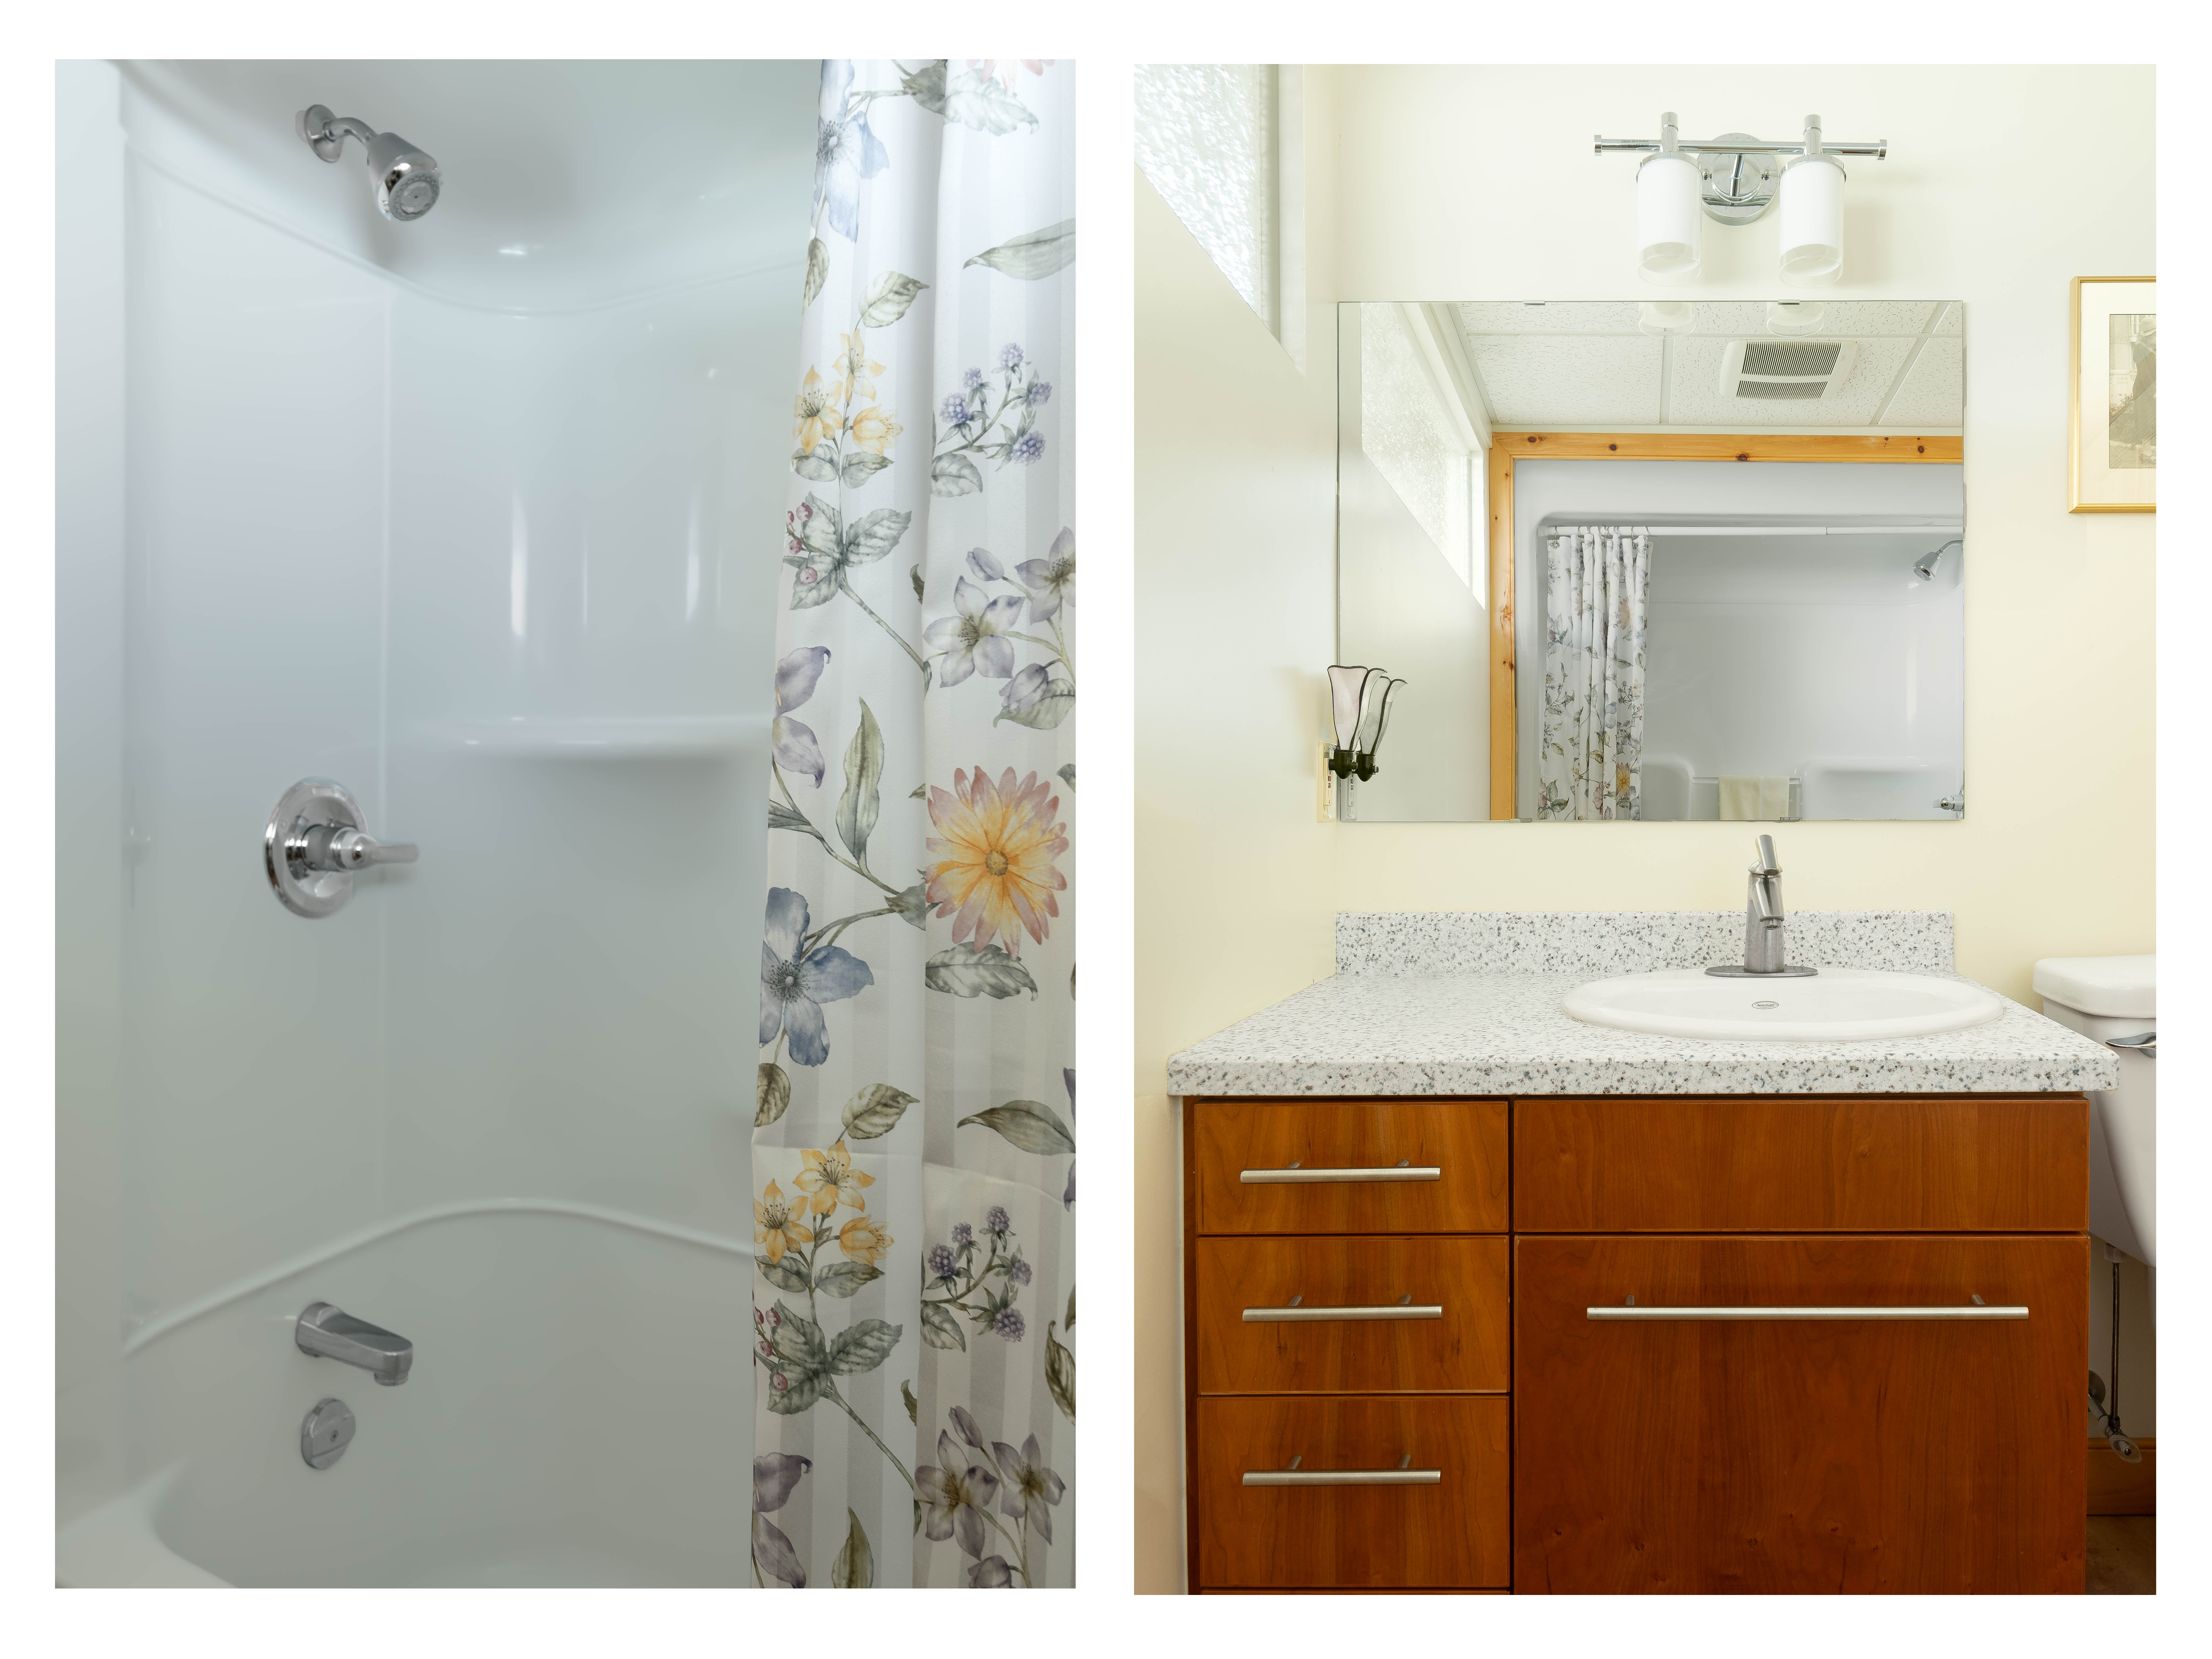 Two images shows different parts of the same bathroom. One image shows a walk-in shower, and the other shows a sink with a mirror hanging above.